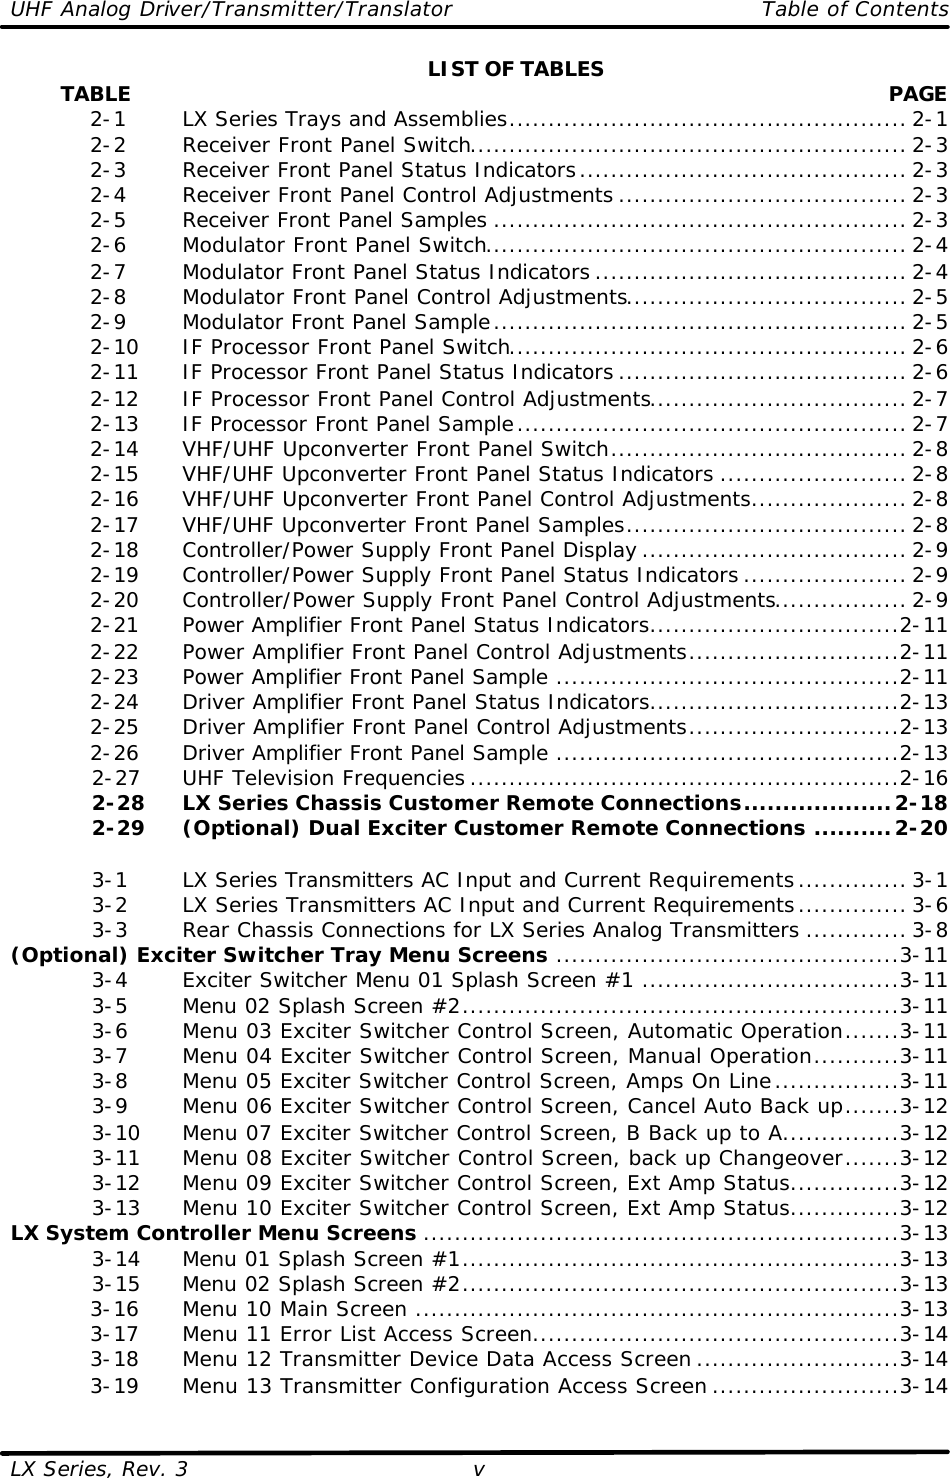 UHF Analog Driver/Transmitter/Translator   Table of Contents  LX Series, Rev. 3 vLIST OF TABLES         TABLE  PAGE  2-1   LX Series Trays and Assemblies................................................... 2-1  2-2   Receiver Front Panel Switch........................................................ 2-3  2-3   Receiver Front Panel Status Indicators.......................................... 2-3  2-4   Receiver Front Panel Control Adjustments ..................................... 2-3  2-5   Receiver Front Panel Samples ..................................................... 2-3  2-6   Modulator Front Panel Switch...................................................... 2-4  2-7   Modulator Front Panel Status Indicators ........................................ 2-4  2-8   Modulator Front Panel Control Adjustments.................................... 2-5  2-9   Modulator Front Panel Sample..................................................... 2-5  2-10 IF Processor Front Panel Switch................................................... 2-6  2-11 IF Processor Front Panel Status Indicators ..................................... 2-6  2-12 IF Processor Front Panel Control Adjustments................................. 2-7  2-13 IF Processor Front Panel Sample.................................................. 2-7  2-14 VHF/UHF Upconverter Front Panel Switch...................................... 2-8  2-15 VHF/UHF Upconverter Front Panel Status Indicators ........................ 2-8  2-16 VHF/UHF Upconverter Front Panel Control Adjustments.................... 2-8  2-17 VHF/UHF Upconverter Front Panel Samples.................................... 2-8  2-18 Controller/Power Supply Front Panel Display .................................. 2-9  2-19 Controller/Power Supply Front Panel Status Indicators ..................... 2-9  2-20 Controller/Power Supply Front Panel Control Adjustments................. 2-9  2-21 Power Amplifier Front Panel Status Indicators................................2-11  2-22 Power Amplifier Front Panel Control Adjustments...........................2-11  2-23 Power Amplifier Front Panel Sample ............................................2-11  2-24 Driver Amplifier Front Panel Status Indicators................................2-13  2-25 Driver Amplifier Front Panel Control Adjustments...........................2-13  2-26 Driver Amplifier Front Panel Sample ............................................2-13  2-27 UHF Television Frequencies .......................................................2-16  2-28 LX Series Chassis Customer Remote Connections...................2-18  2-29 (Optional) Dual Exciter Customer Remote Connections ..........2-20   3-1   LX Series Transmitters AC Input and Current Requirements.............. 3-1  3-2   LX Series Transmitters AC Input and Current Requirements.............. 3-6  3-3   Rear Chassis Connections for LX Series Analog Transmitters ............. 3-8 (Optional) Exciter Switcher Tray Menu Screens ............................................3-11  3-4   Exciter Switcher Menu 01 Splash Screen #1 .................................3-11  3-5   Menu 02 Splash Screen #2........................................................3-11  3-6   Menu 03 Exciter Switcher Control Screen, Automatic Operation.......3-11  3-7   Menu 04 Exciter Switcher Control Screen, Manual Operation...........3-11  3-8   Menu 05 Exciter Switcher Control Screen, Amps On Line................3-11  3-9   Menu 06 Exciter Switcher Control Screen, Cancel Auto Back up.......3-12  3-10 Menu 07 Exciter Switcher Control Screen, B Back up to A...............3-12  3-11 Menu 08 Exciter Switcher Control Screen, back up Changeover.......3-12  3-12 Menu 09 Exciter Switcher Control Screen, Ext Amp Status..............3-12  3-13 Menu 10 Exciter Switcher Control Screen, Ext Amp Status..............3-12 LX System Controller Menu Screens .............................................................3-13  3-14 Menu 01 Splash Screen #1........................................................3-13  3-15 Menu 02 Splash Screen #2........................................................3-13  3-16 Menu 10 Main Screen ..............................................................3-13  3-17 Menu 11 Error List Access Screen...............................................3-14  3-18 Menu 12 Transmitter Device Data Access Screen ..........................3-14  3-19 Menu 13 Transmitter Configuration Access Screen ........................3-14 